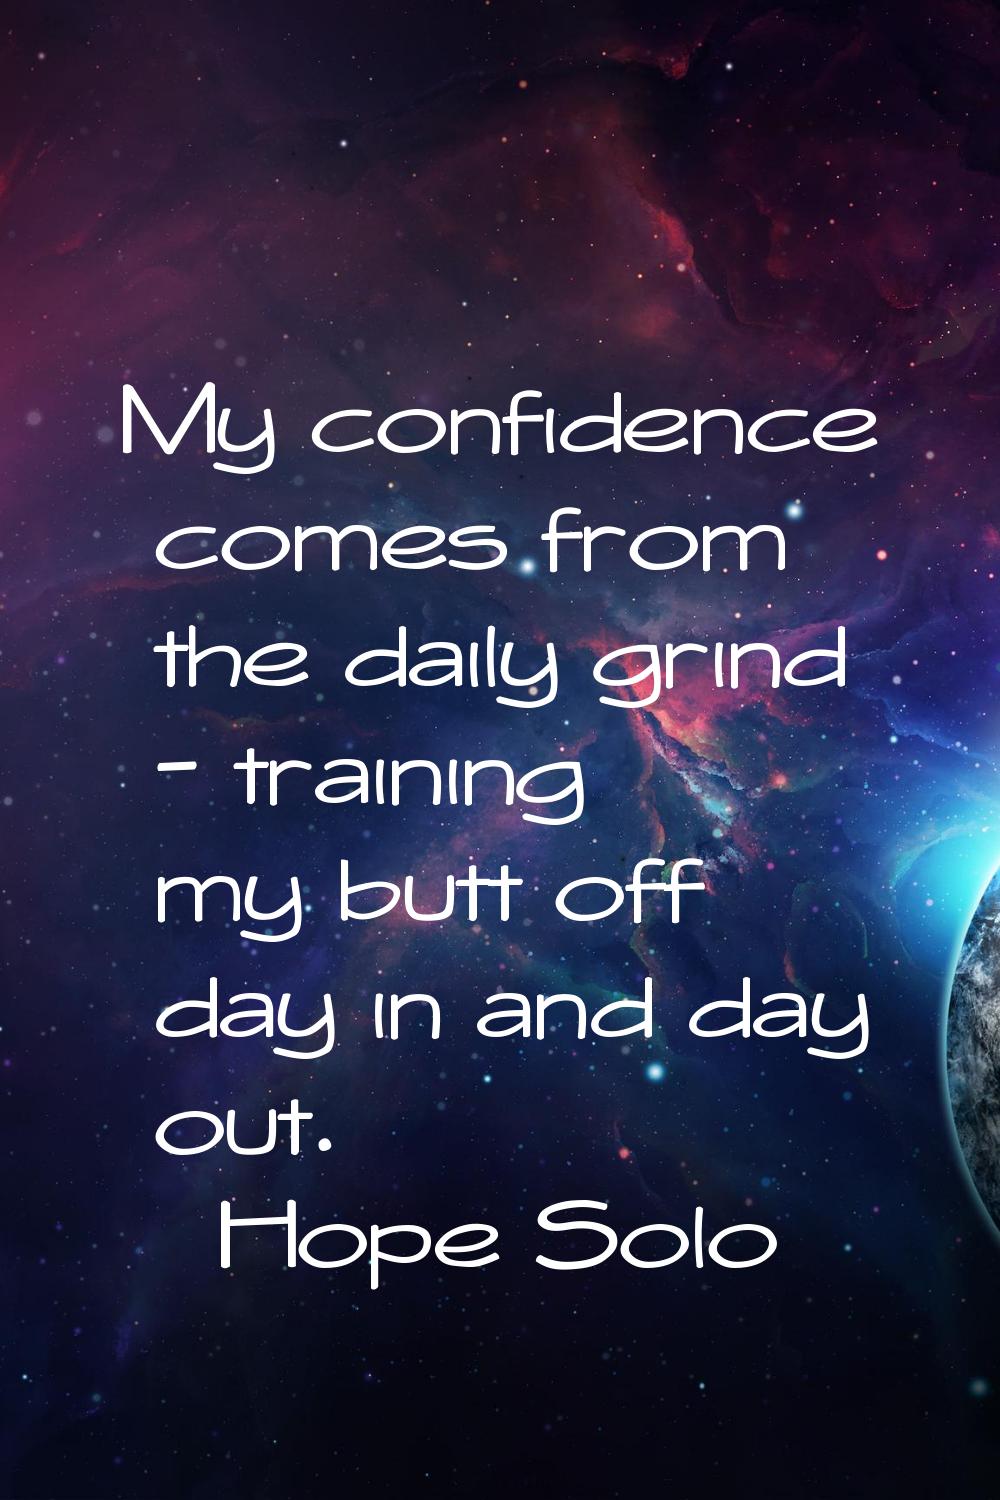 My confidence comes from the daily grind - training my butt off day in and day out.